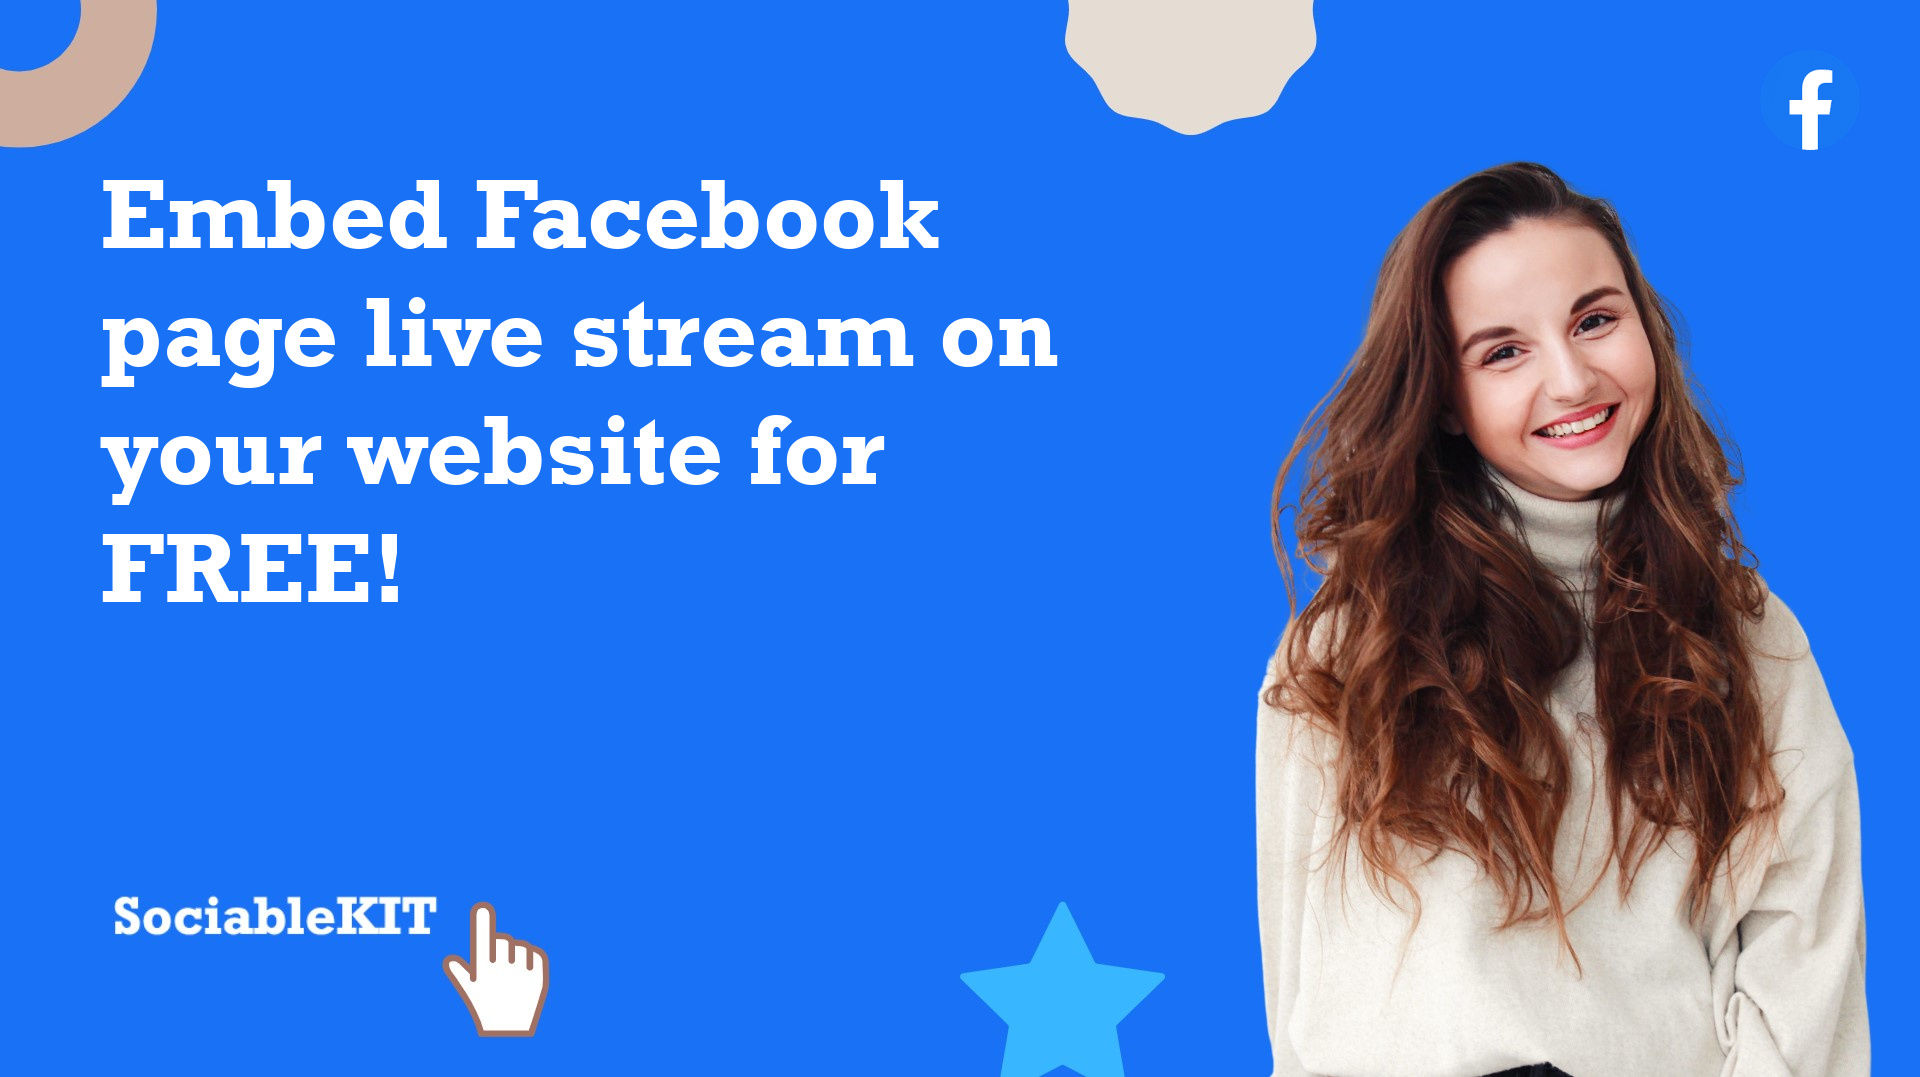 How to embed Facebook page live stream on your website for FREE?